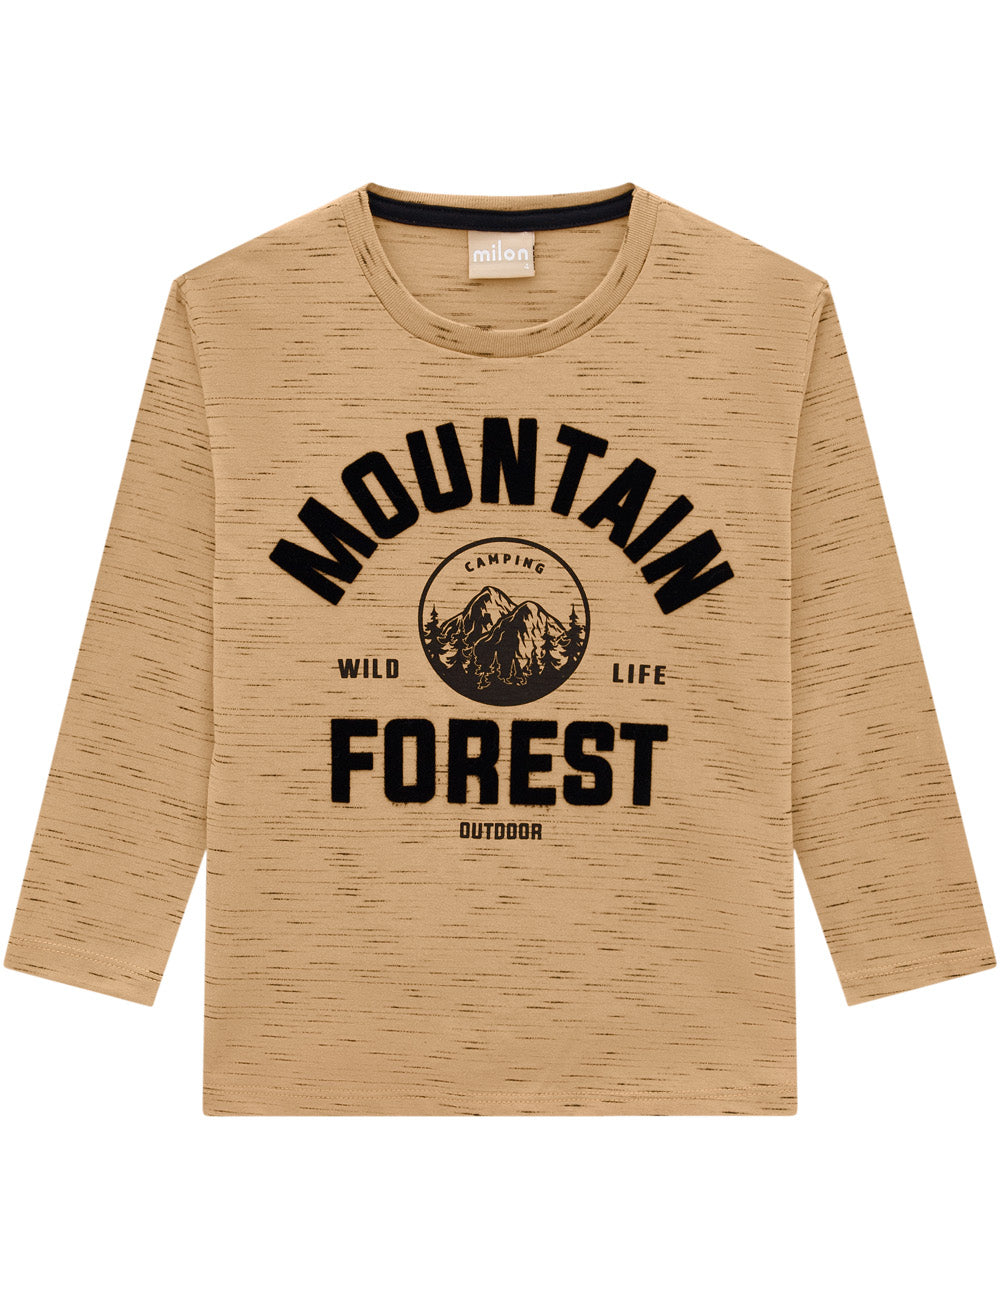 Mountain Forest Shirt by Milon